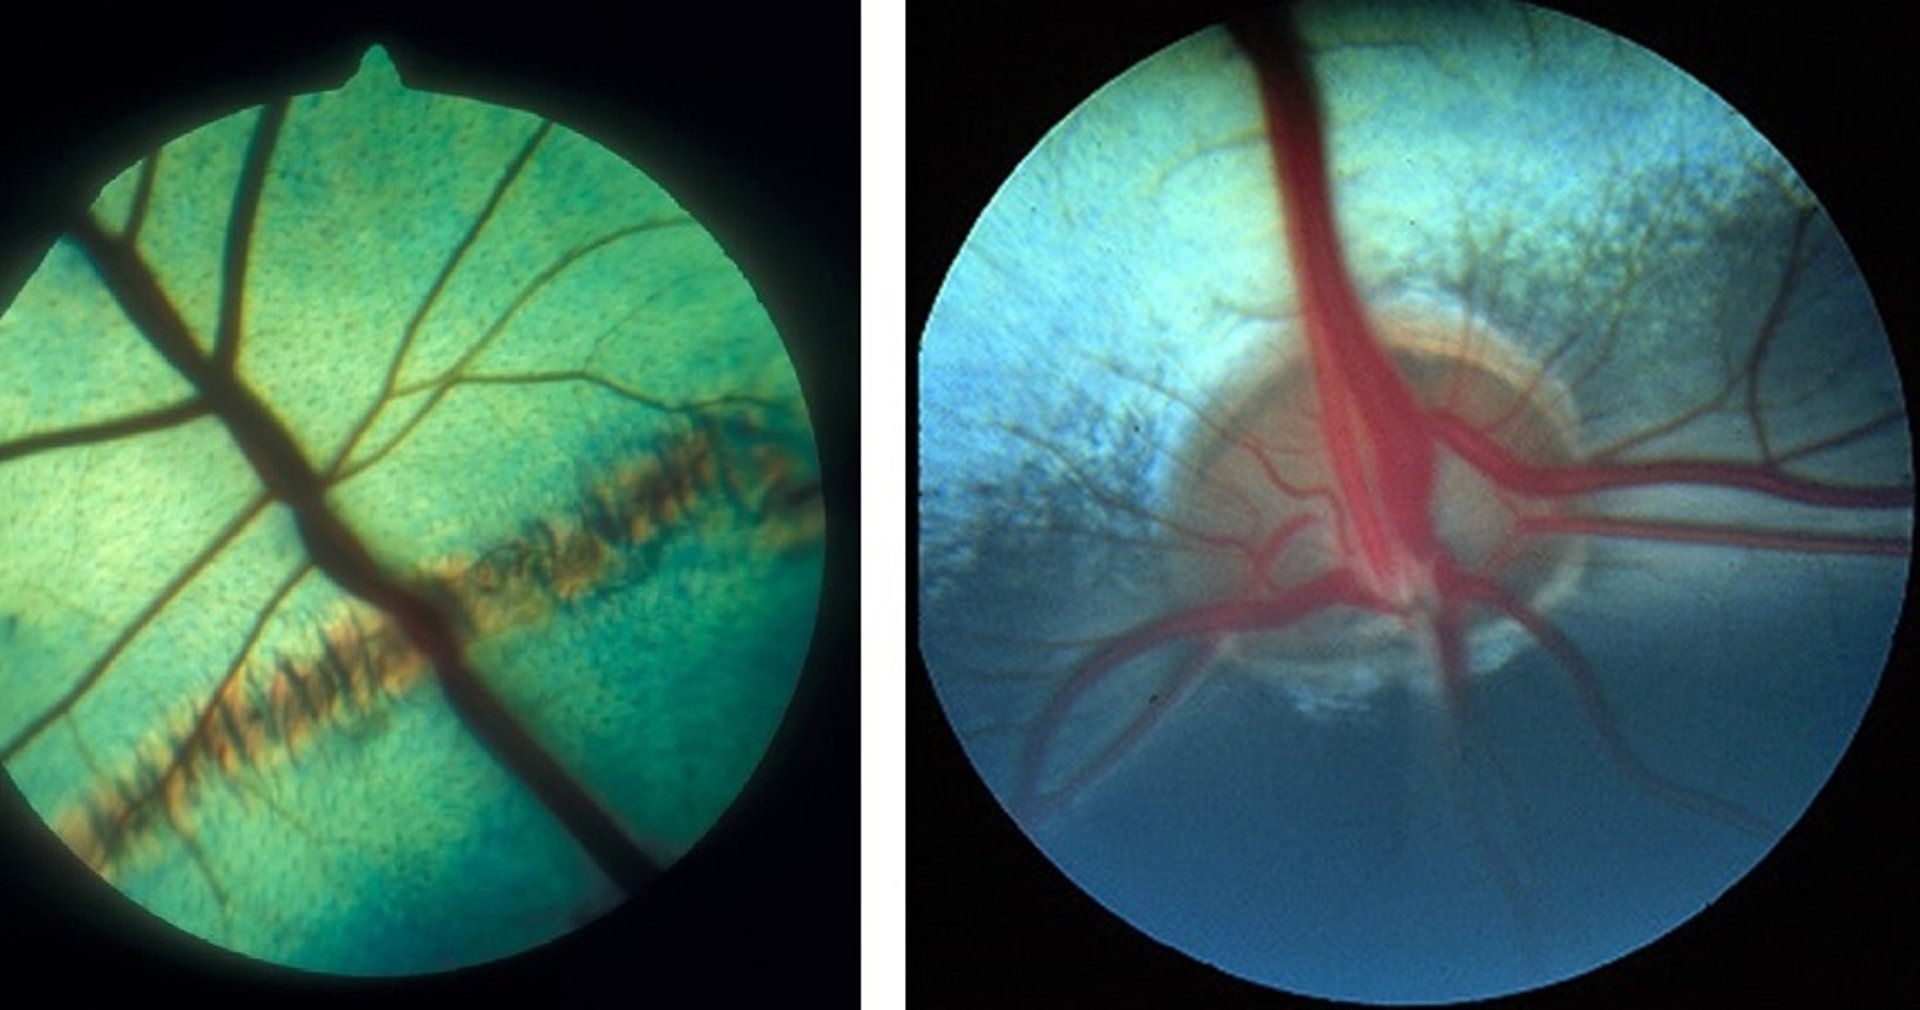 Previous chorioretinitis and normal fundus, cow